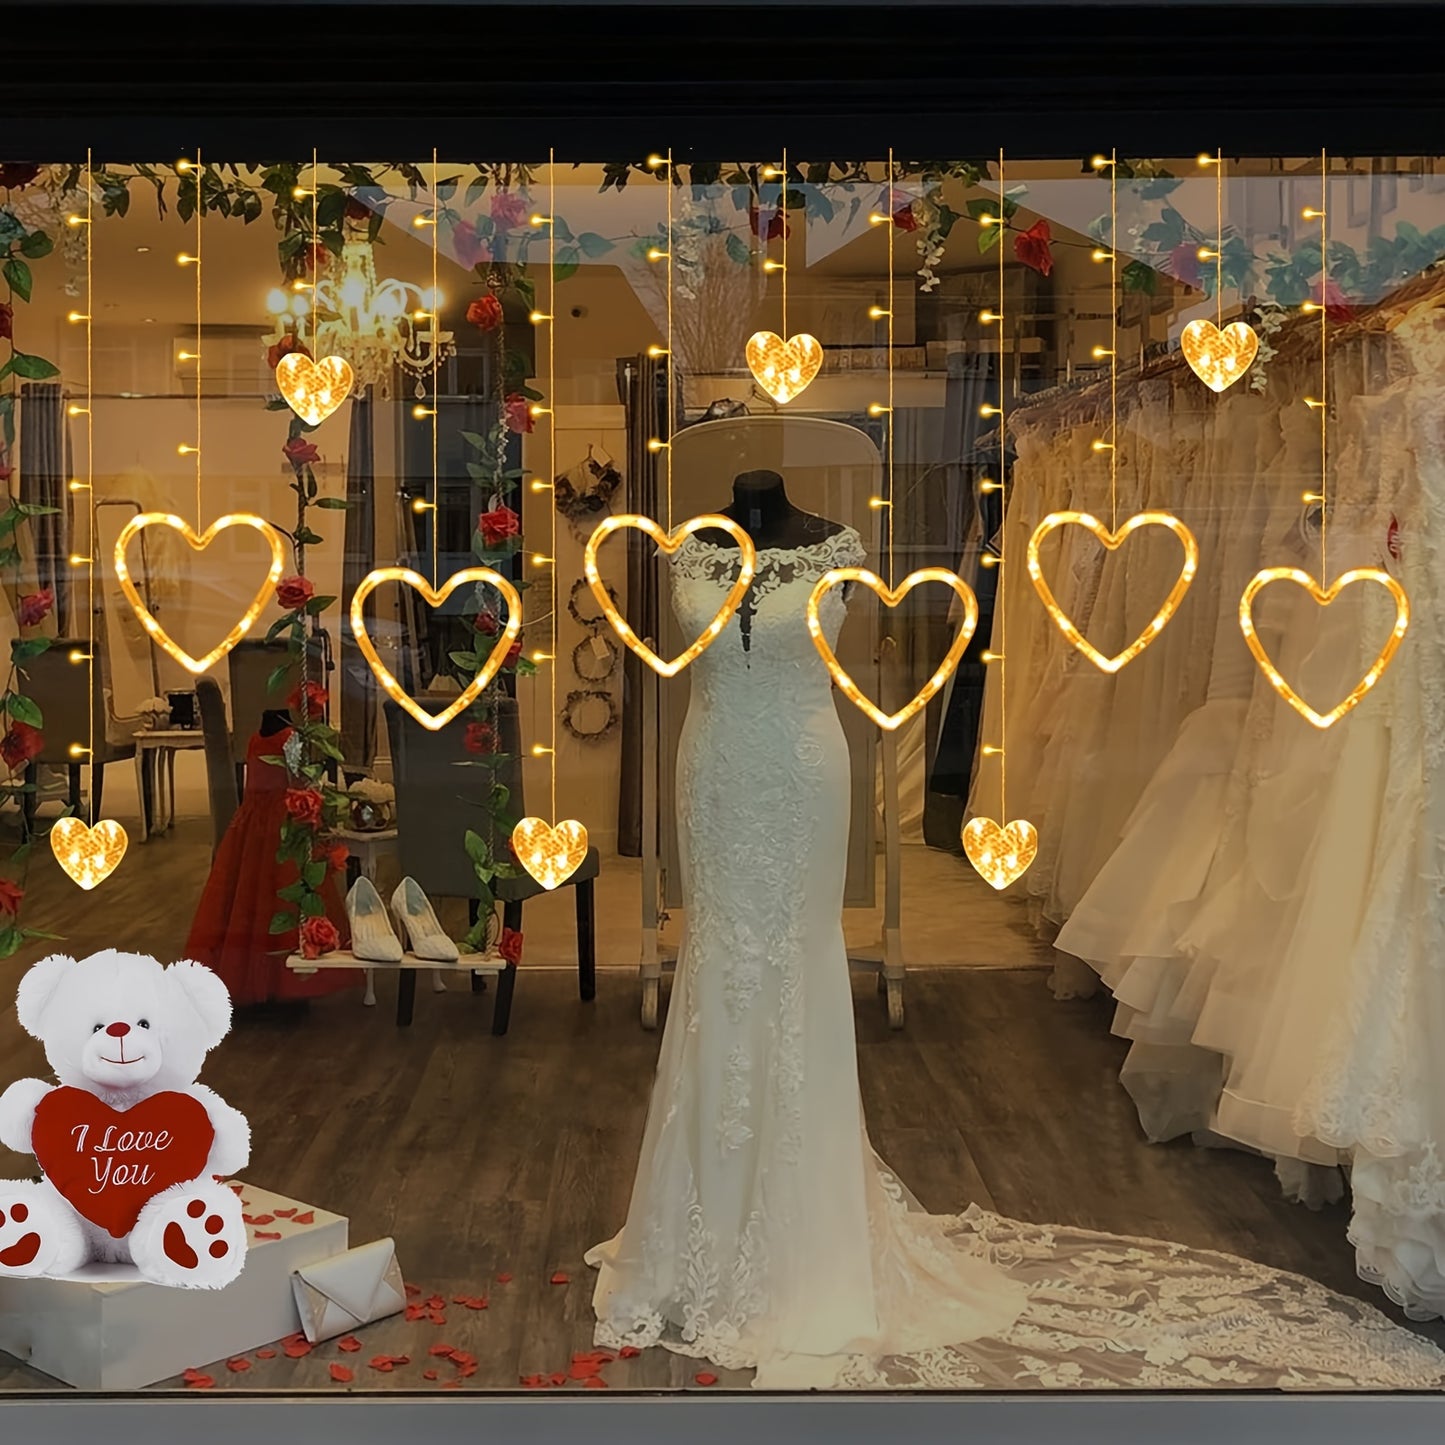 Waterproof Heart-Shaped LED Curtain String Lights with 138 LEDs, 8 Flashing Modes, and Dual Power Options - Perfect for Valentine's Day, Weddings, Christmas, and More!